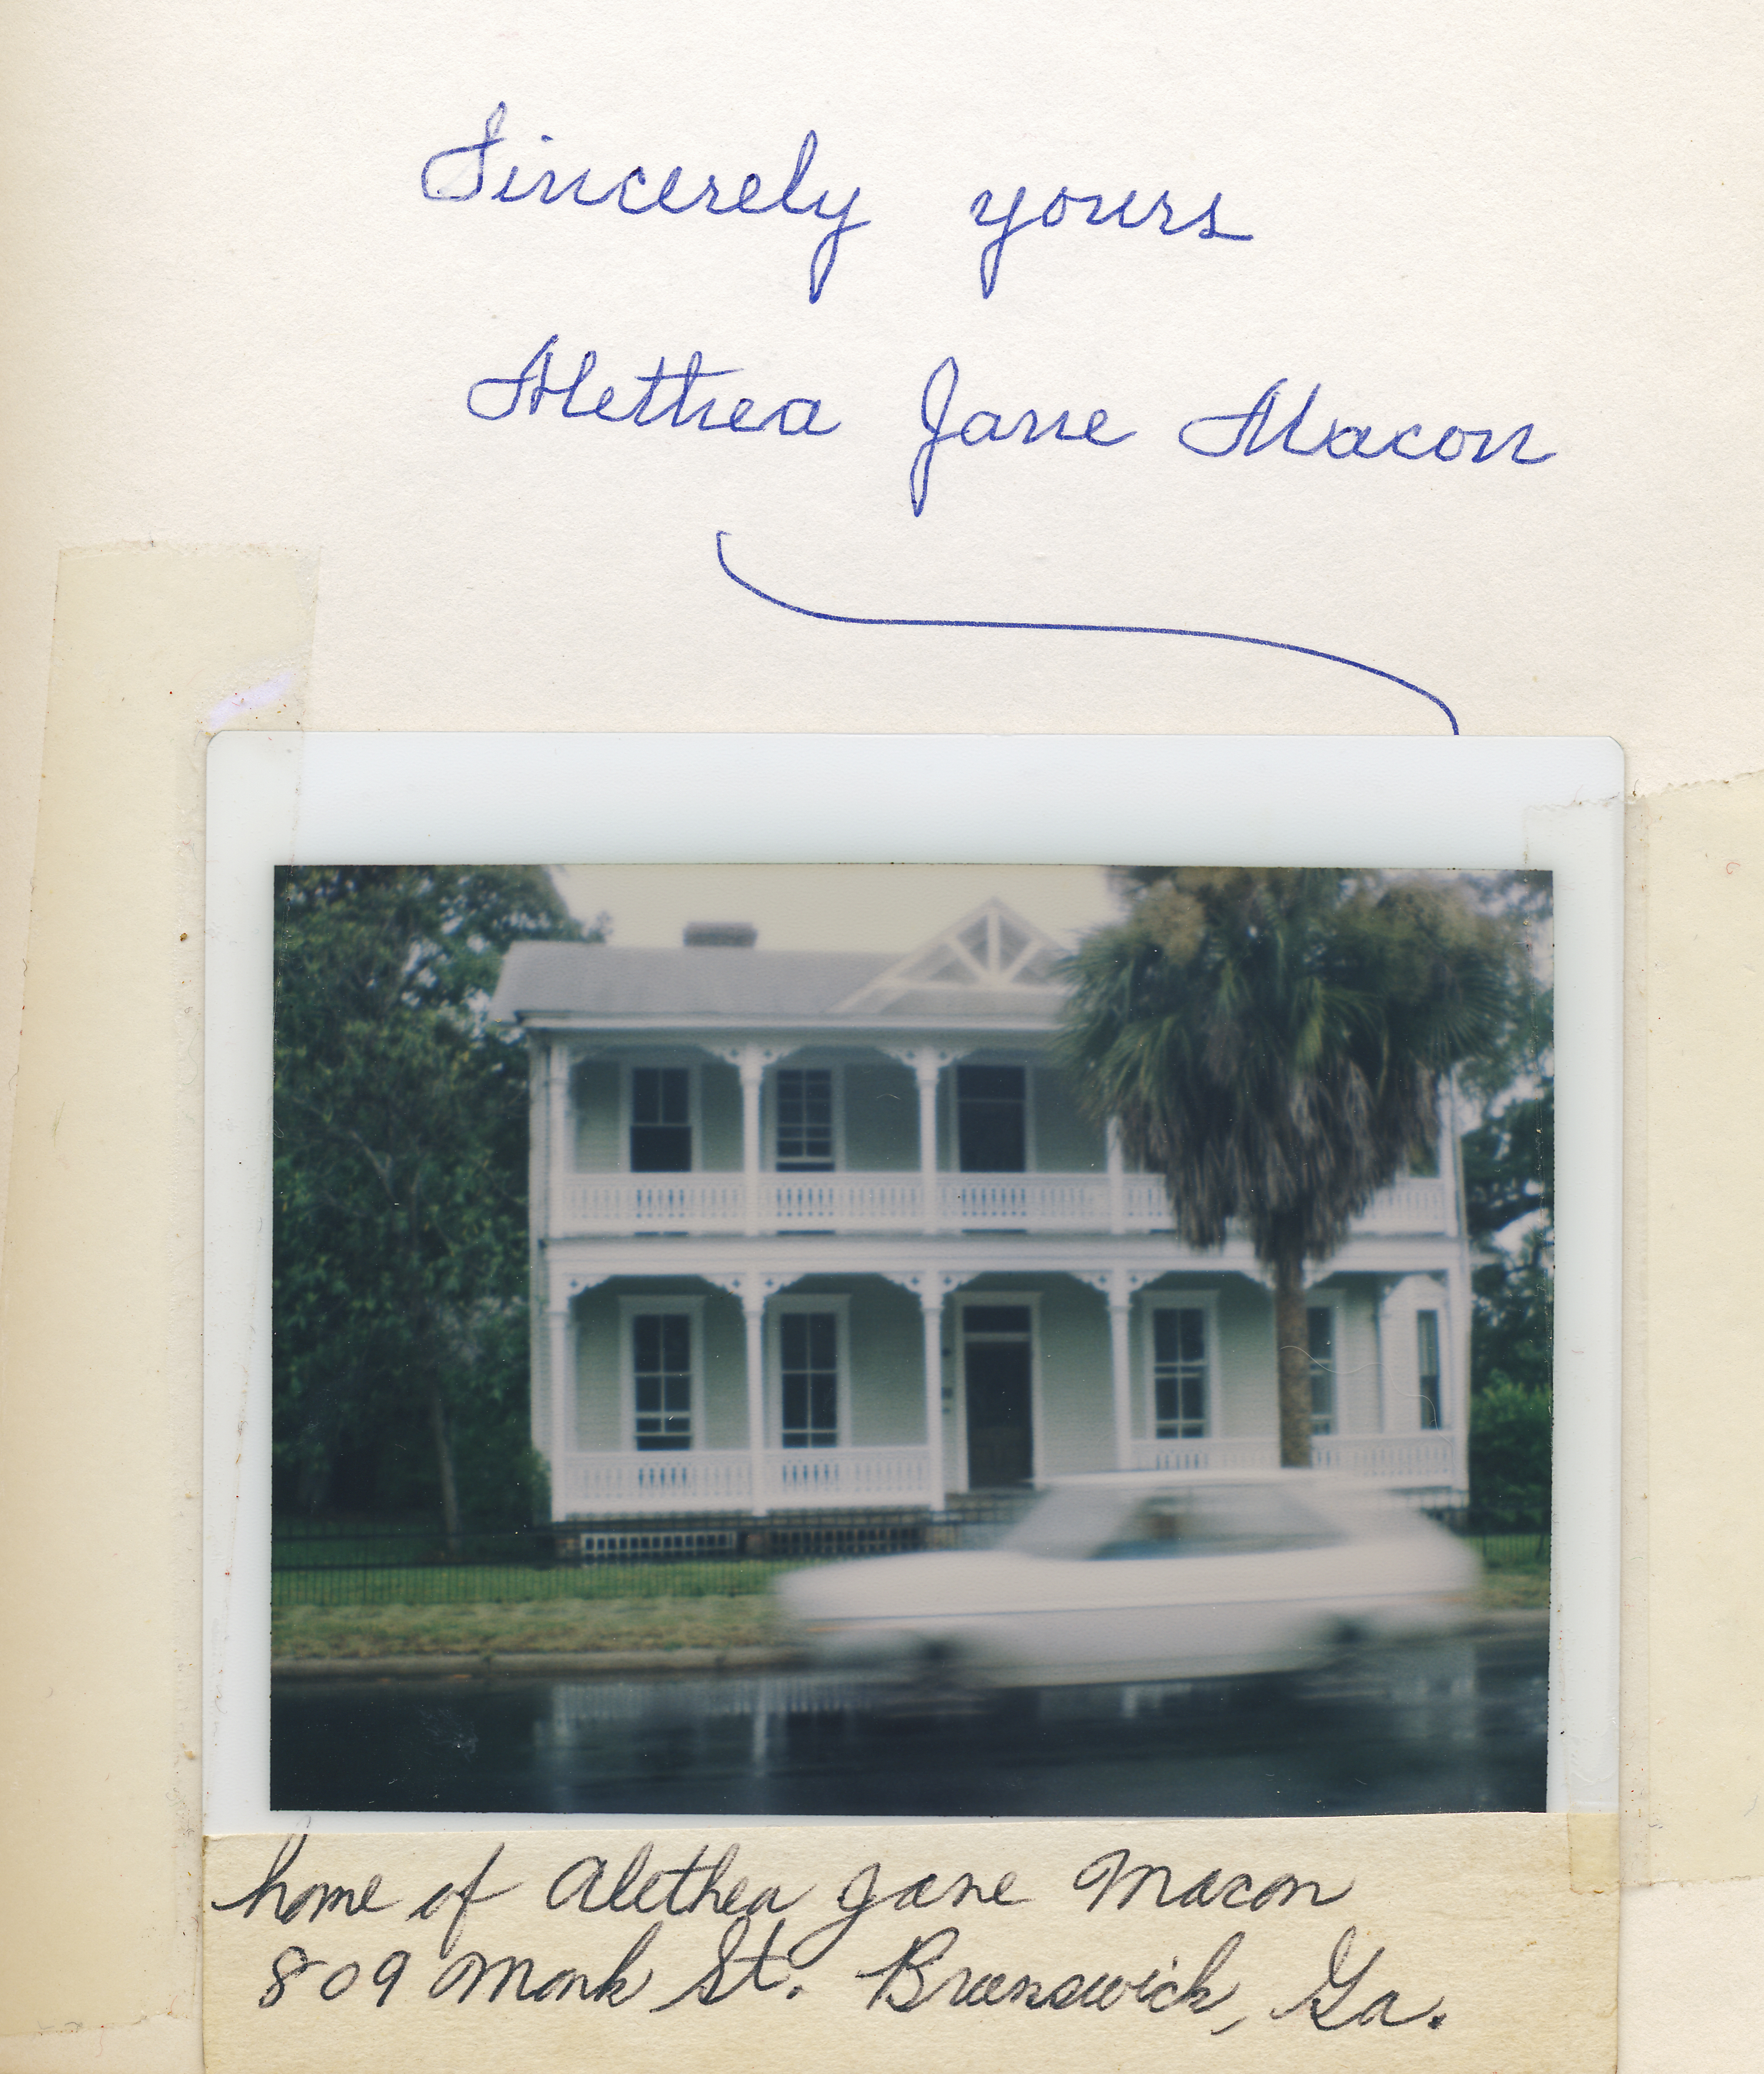 Signature and home of Alethea Jane Macon